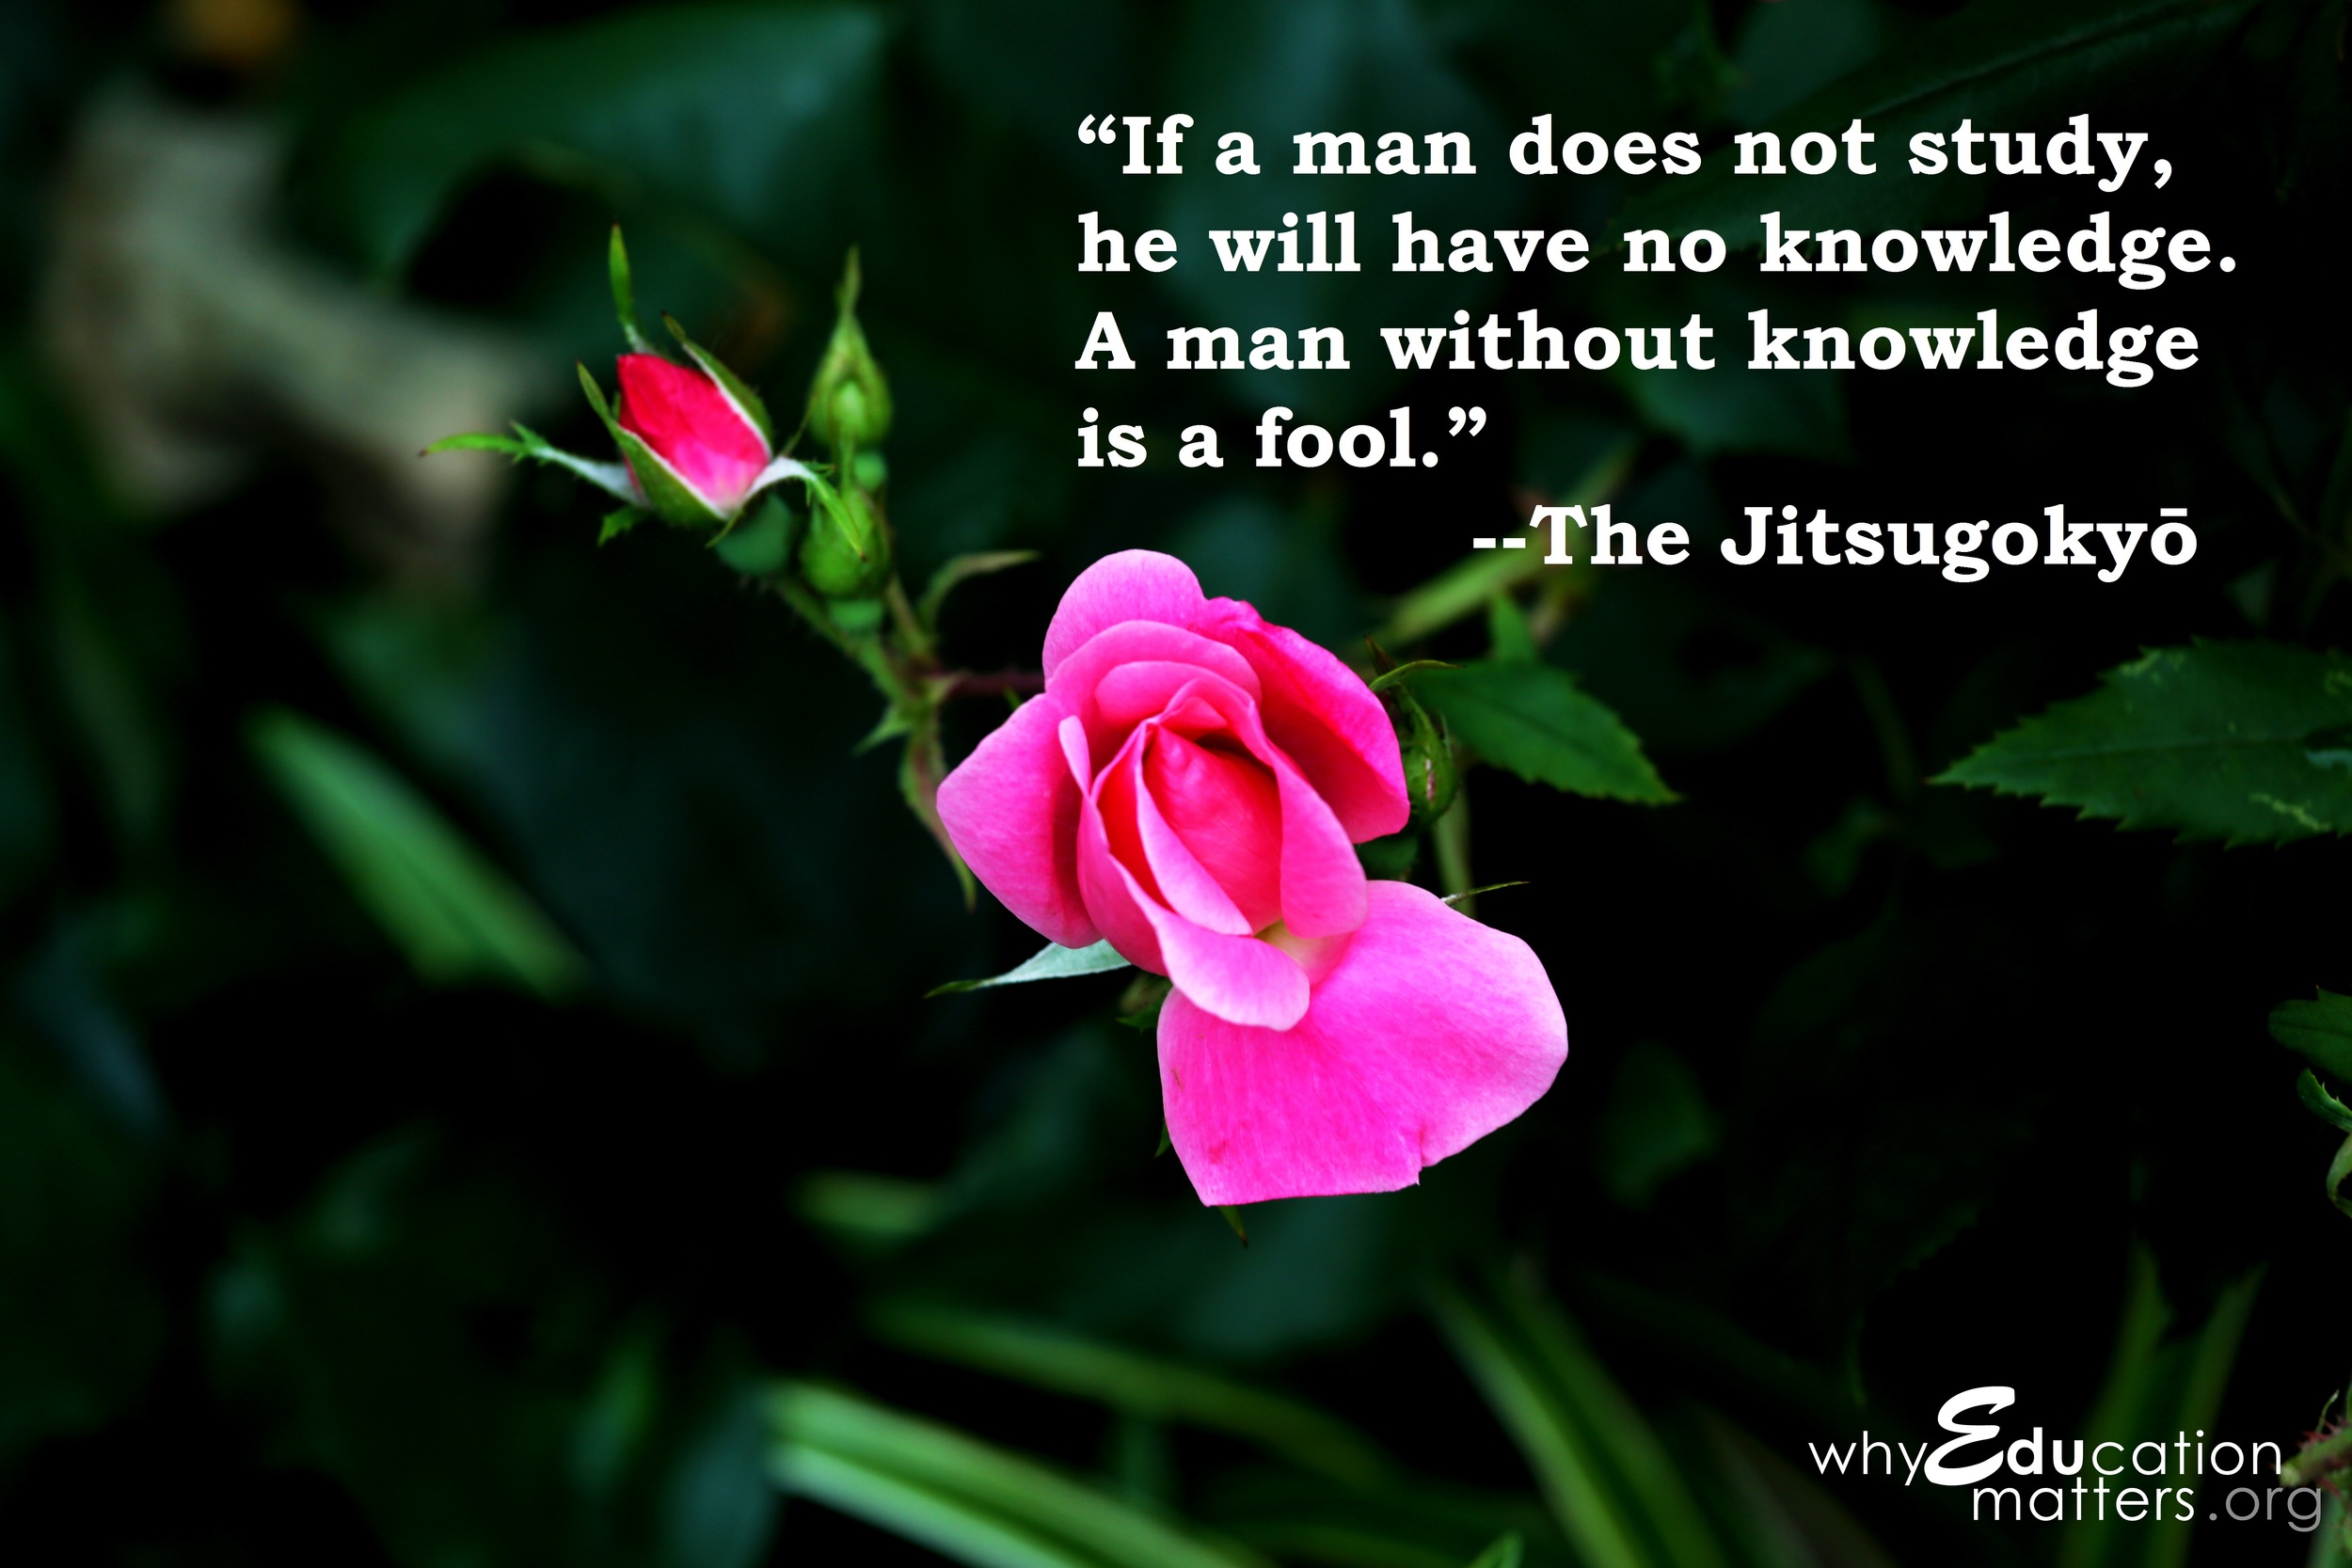 “If a man does not study, he will have no knowledge. A man without knowledge is a fool.” --The Jitsugokyō 